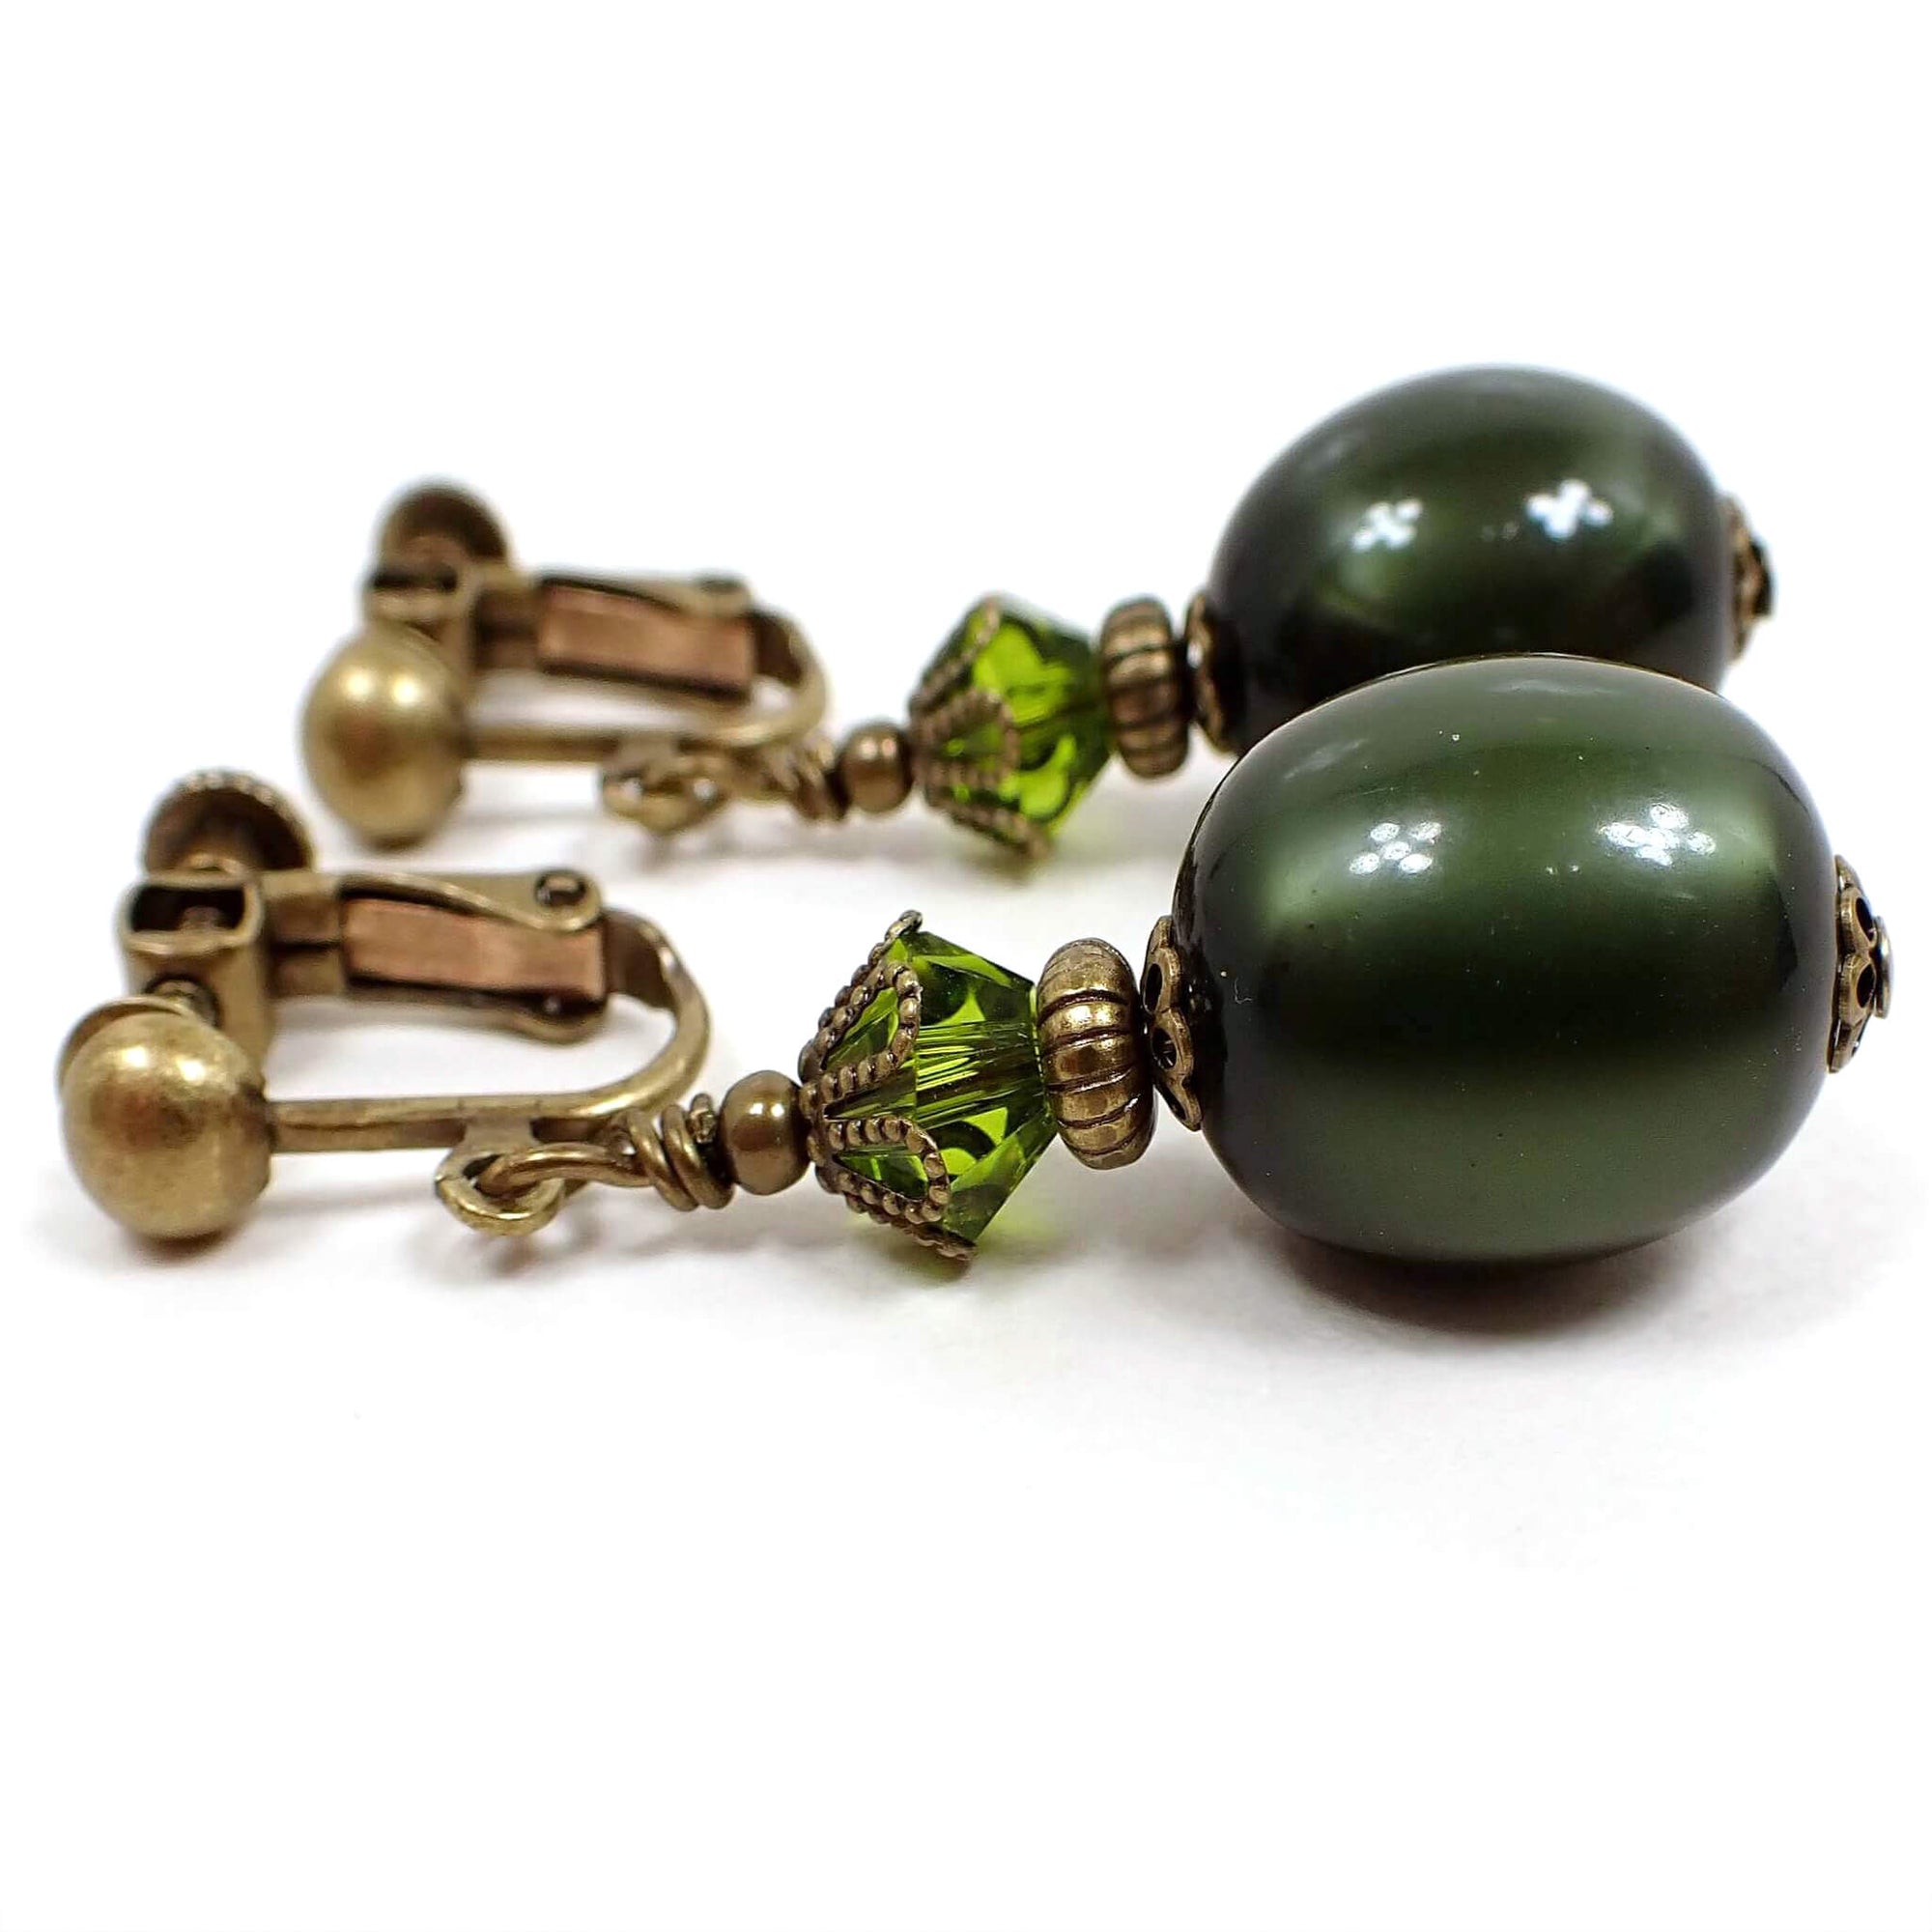 Side view of the handmade olive green oval drop earrings. The metal is antiqued brass in color. There is a faceted glass crystal olive green bead at the top and an oval moonglow lucite olive green bead at the bottom. The lucite bead has a glowy like appearance as you move around in the light.